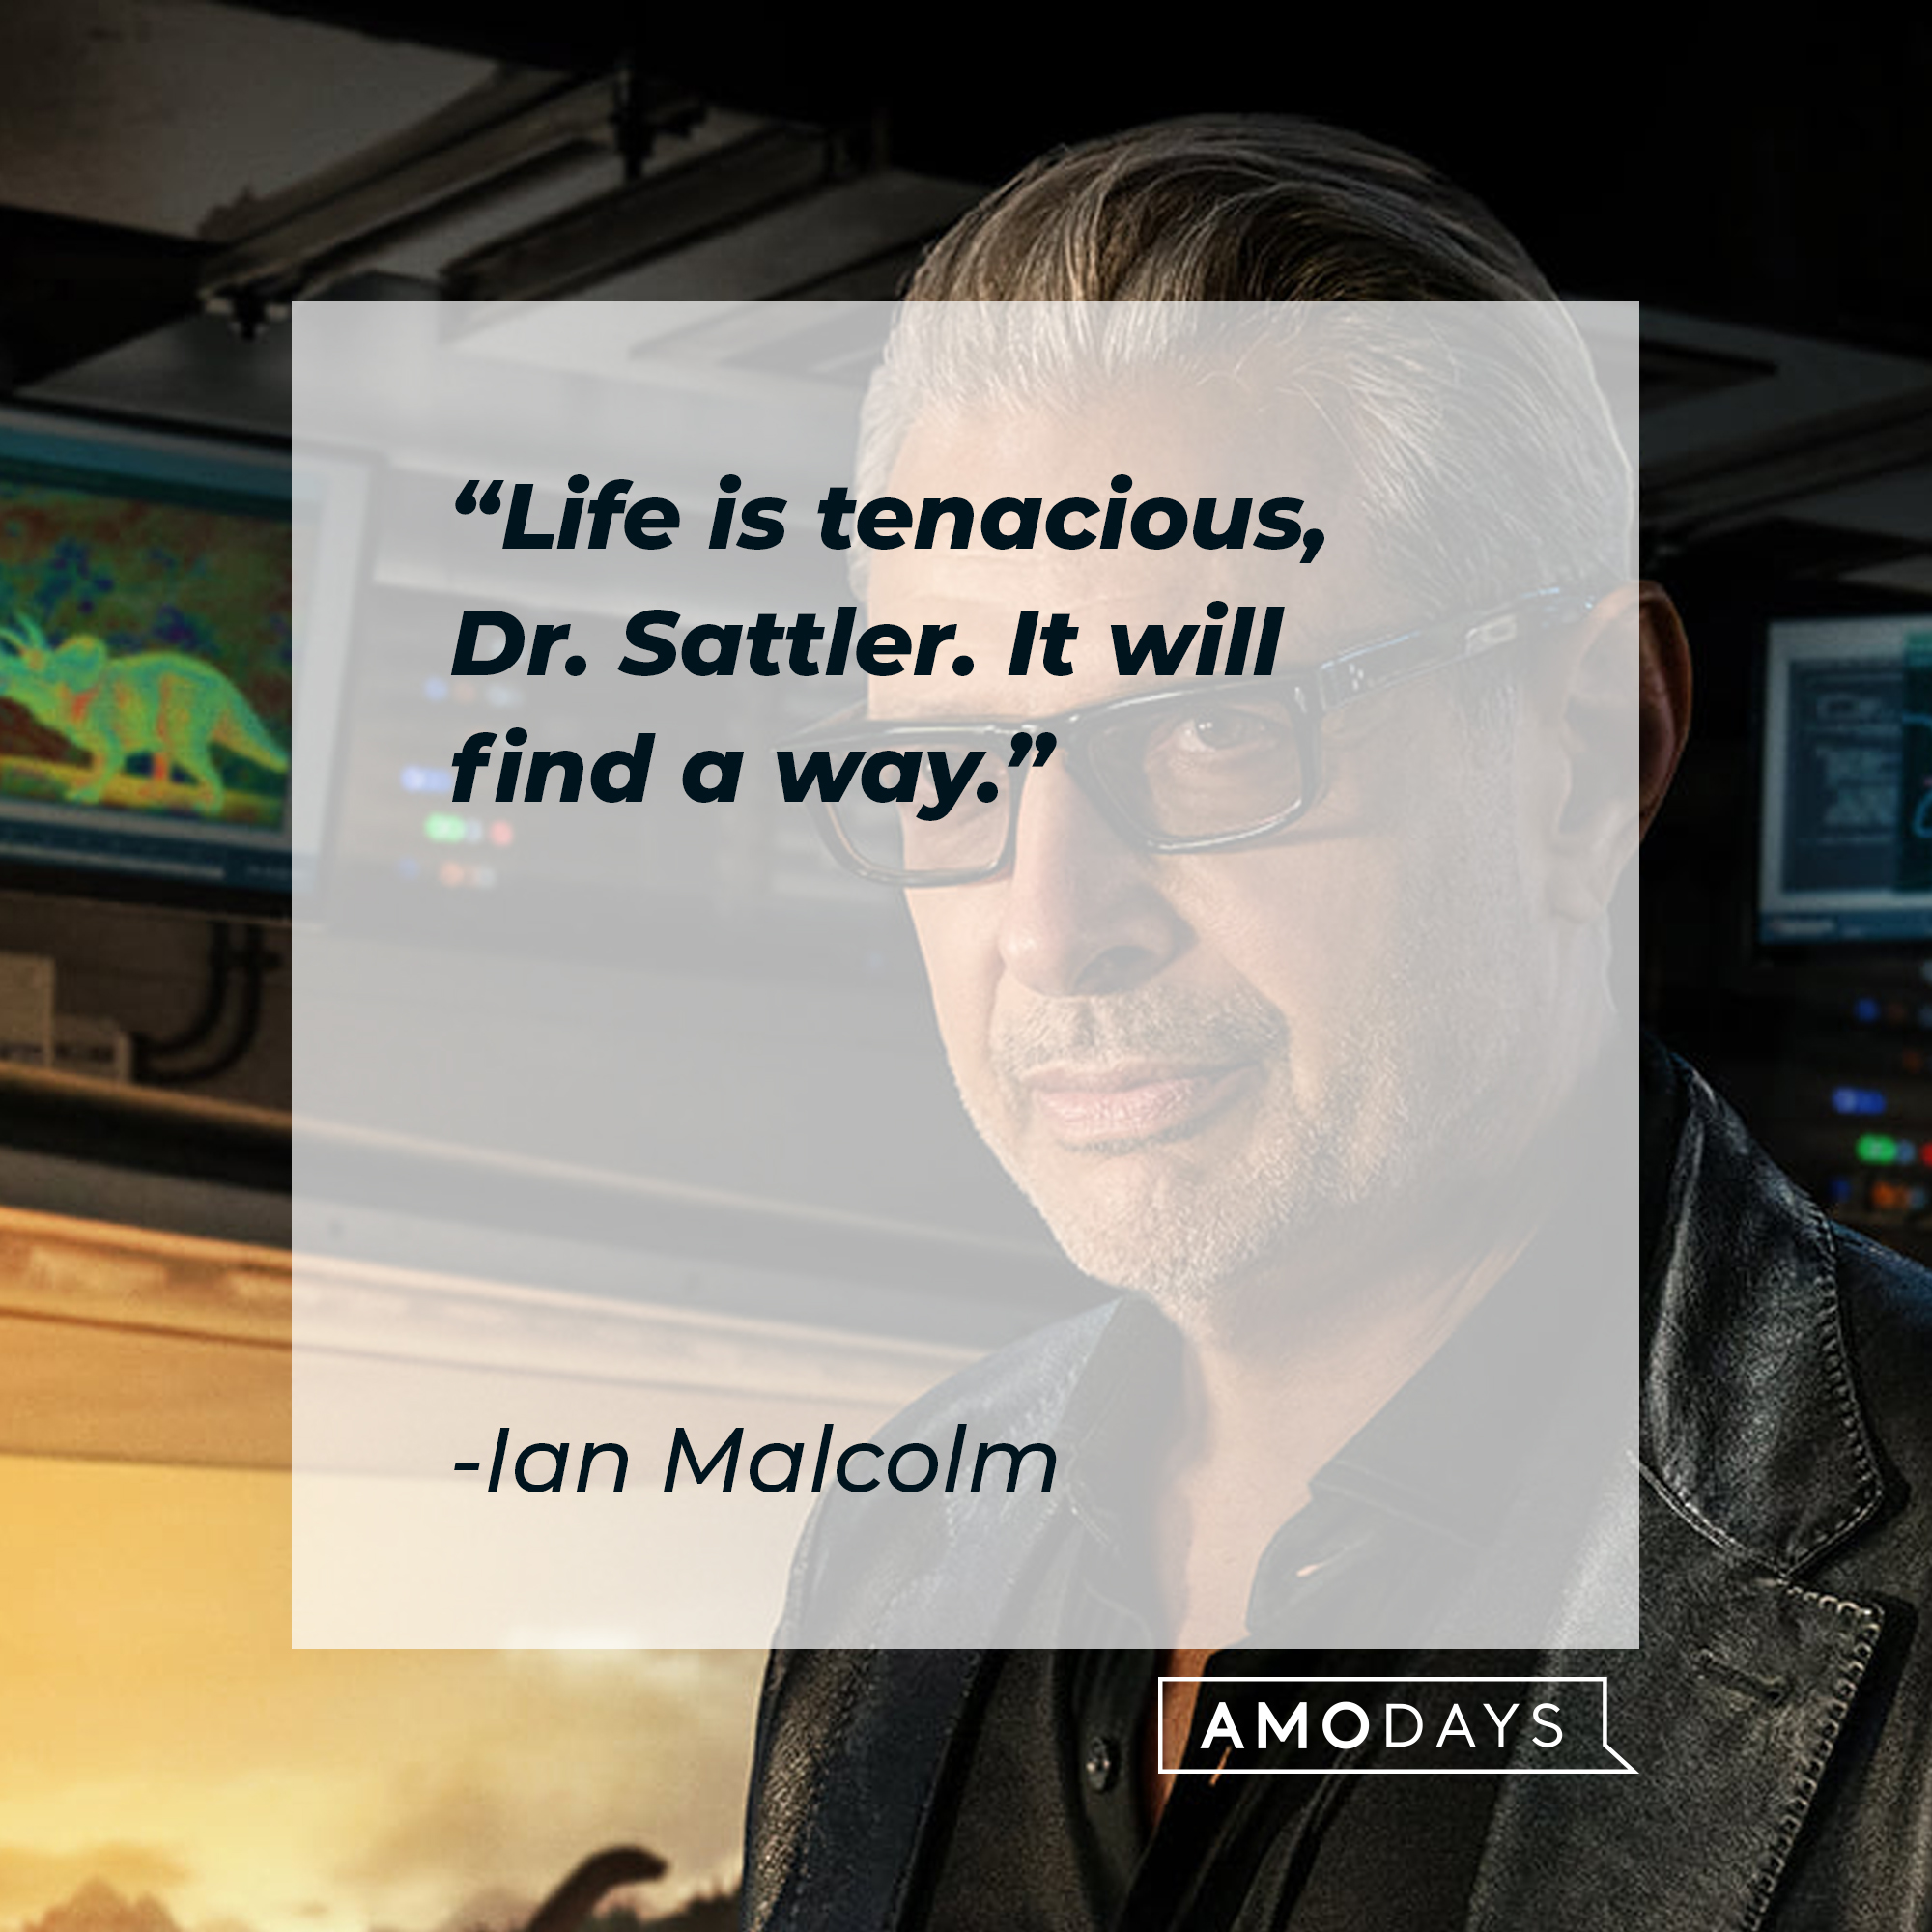 An image of Ian Malcolm with his quote: “Life is tenacious, Dr. Sattler. It will find a way.” | Source: Facebook.com/JurassicWorld